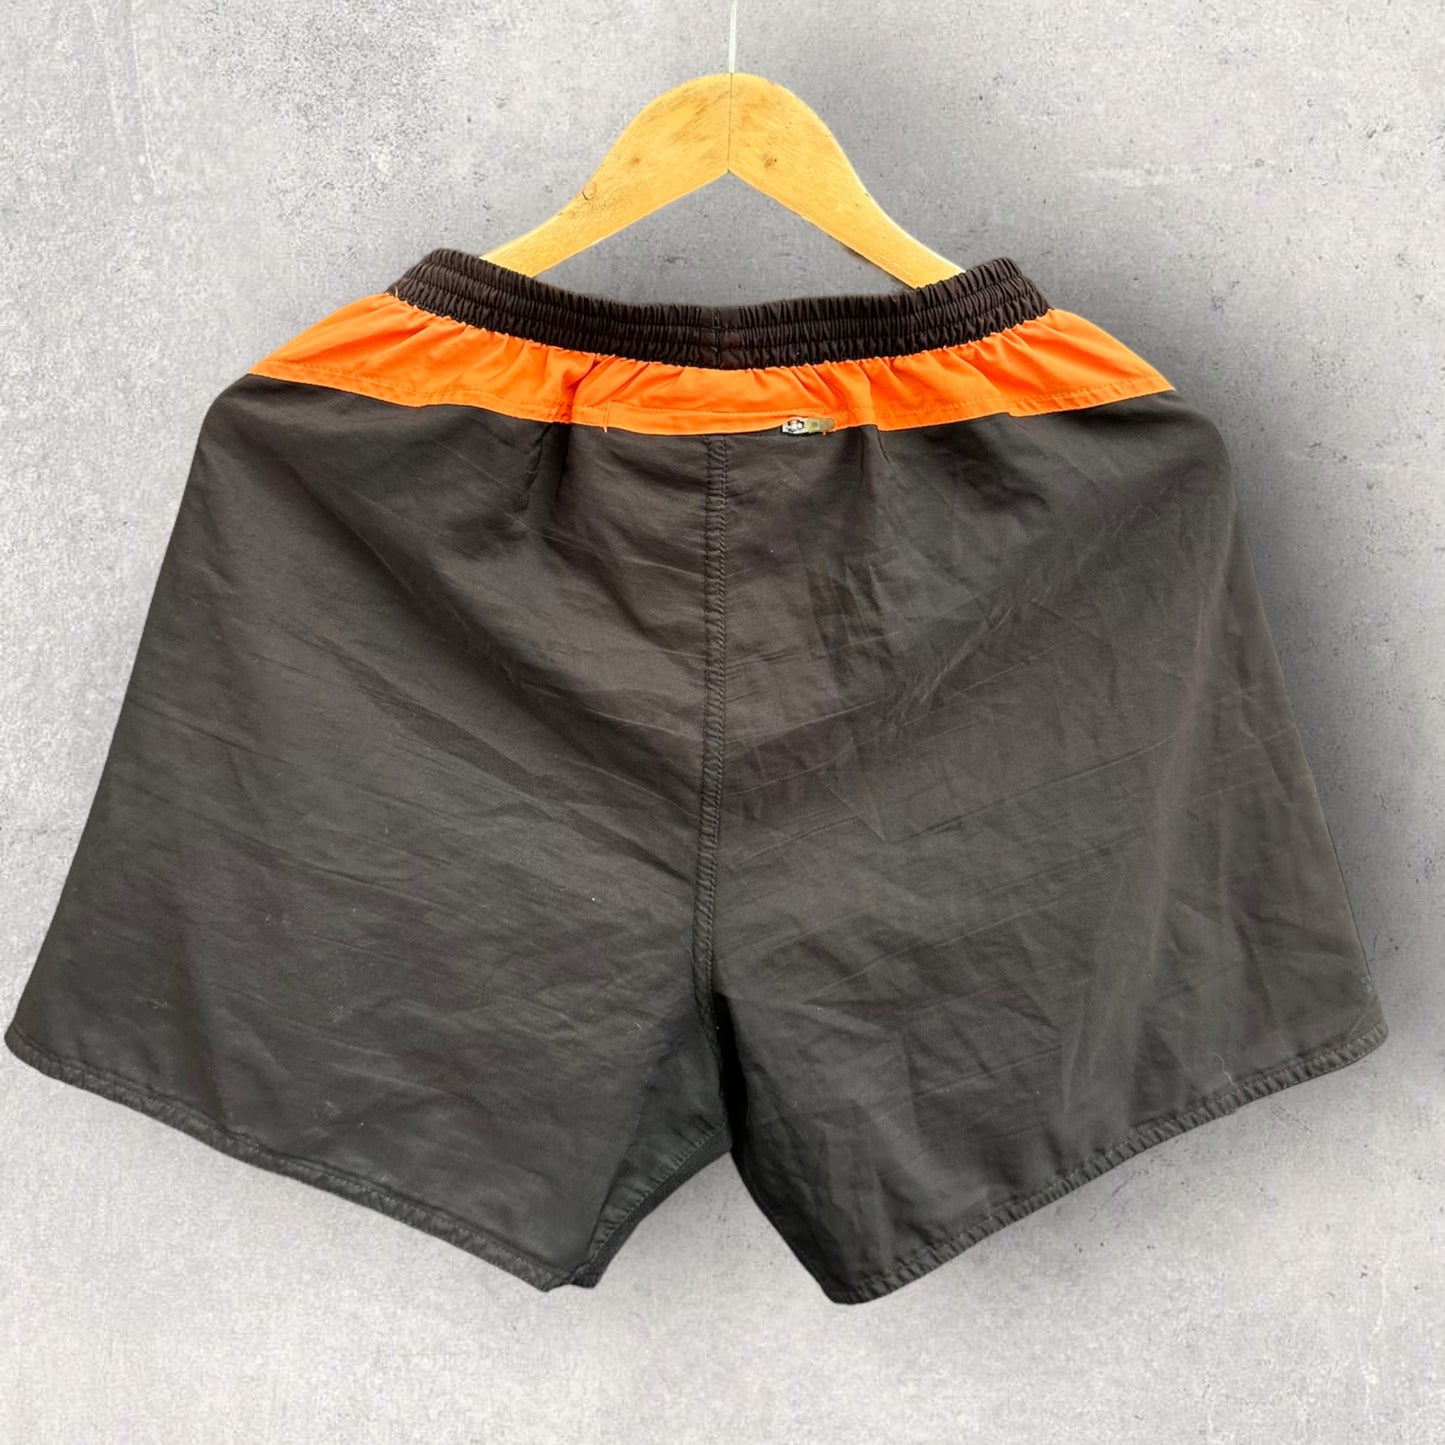 WESTS TIGERS ISC TRAINING SHORTS